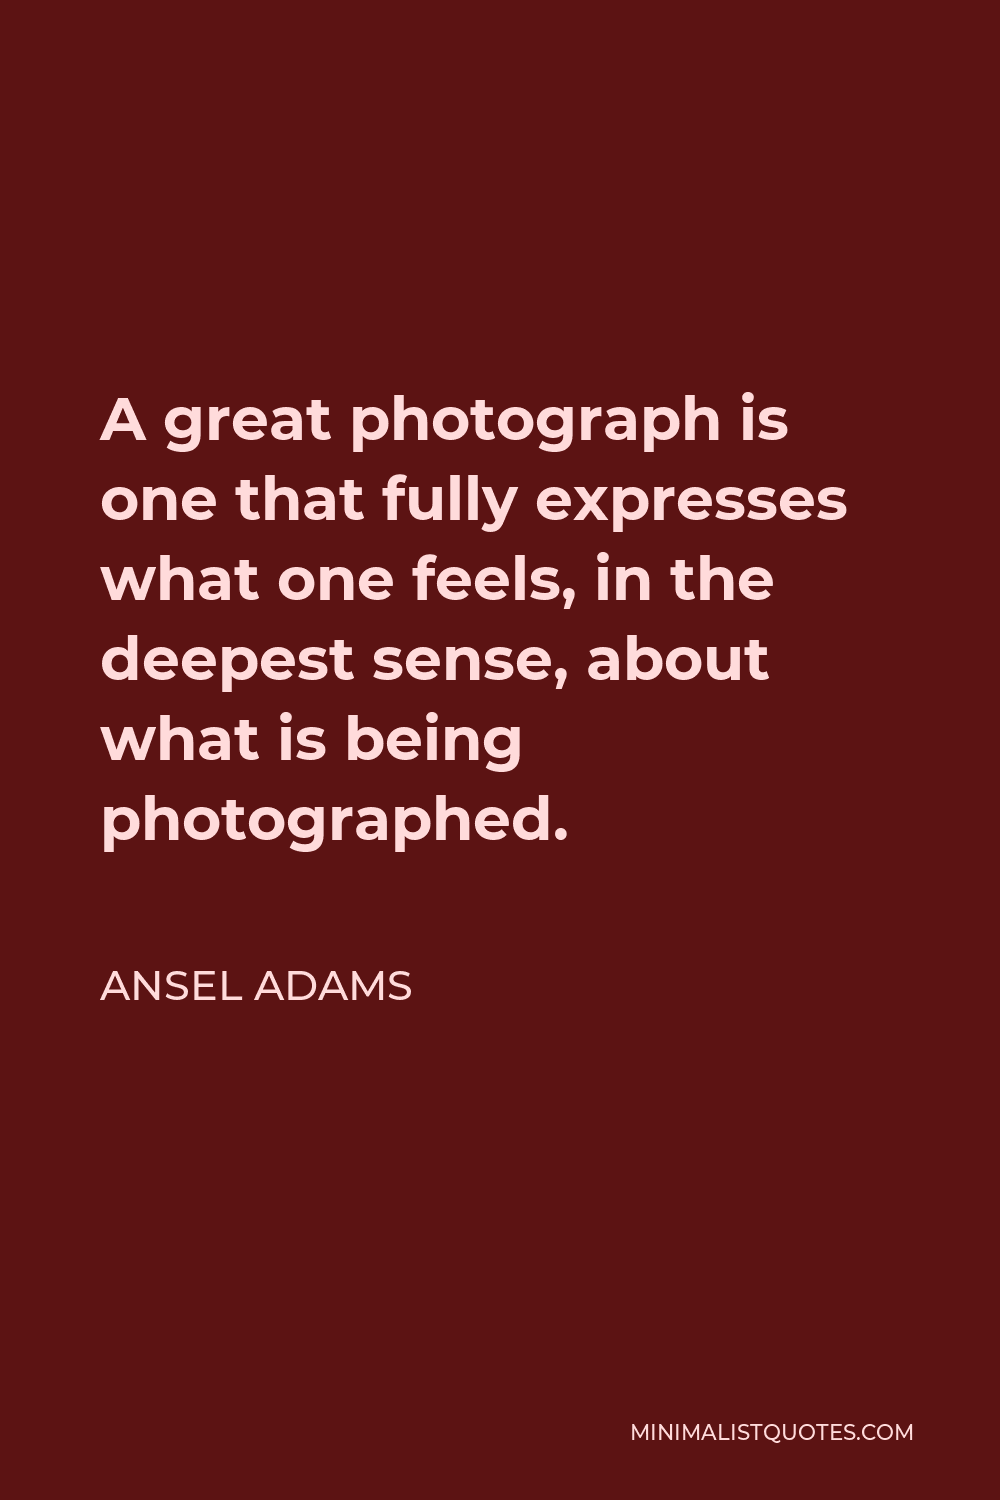 Ansel Adams Quote - A great photograph is one that fully expresses what one feels, in the deepest sense, about what is being photographed.